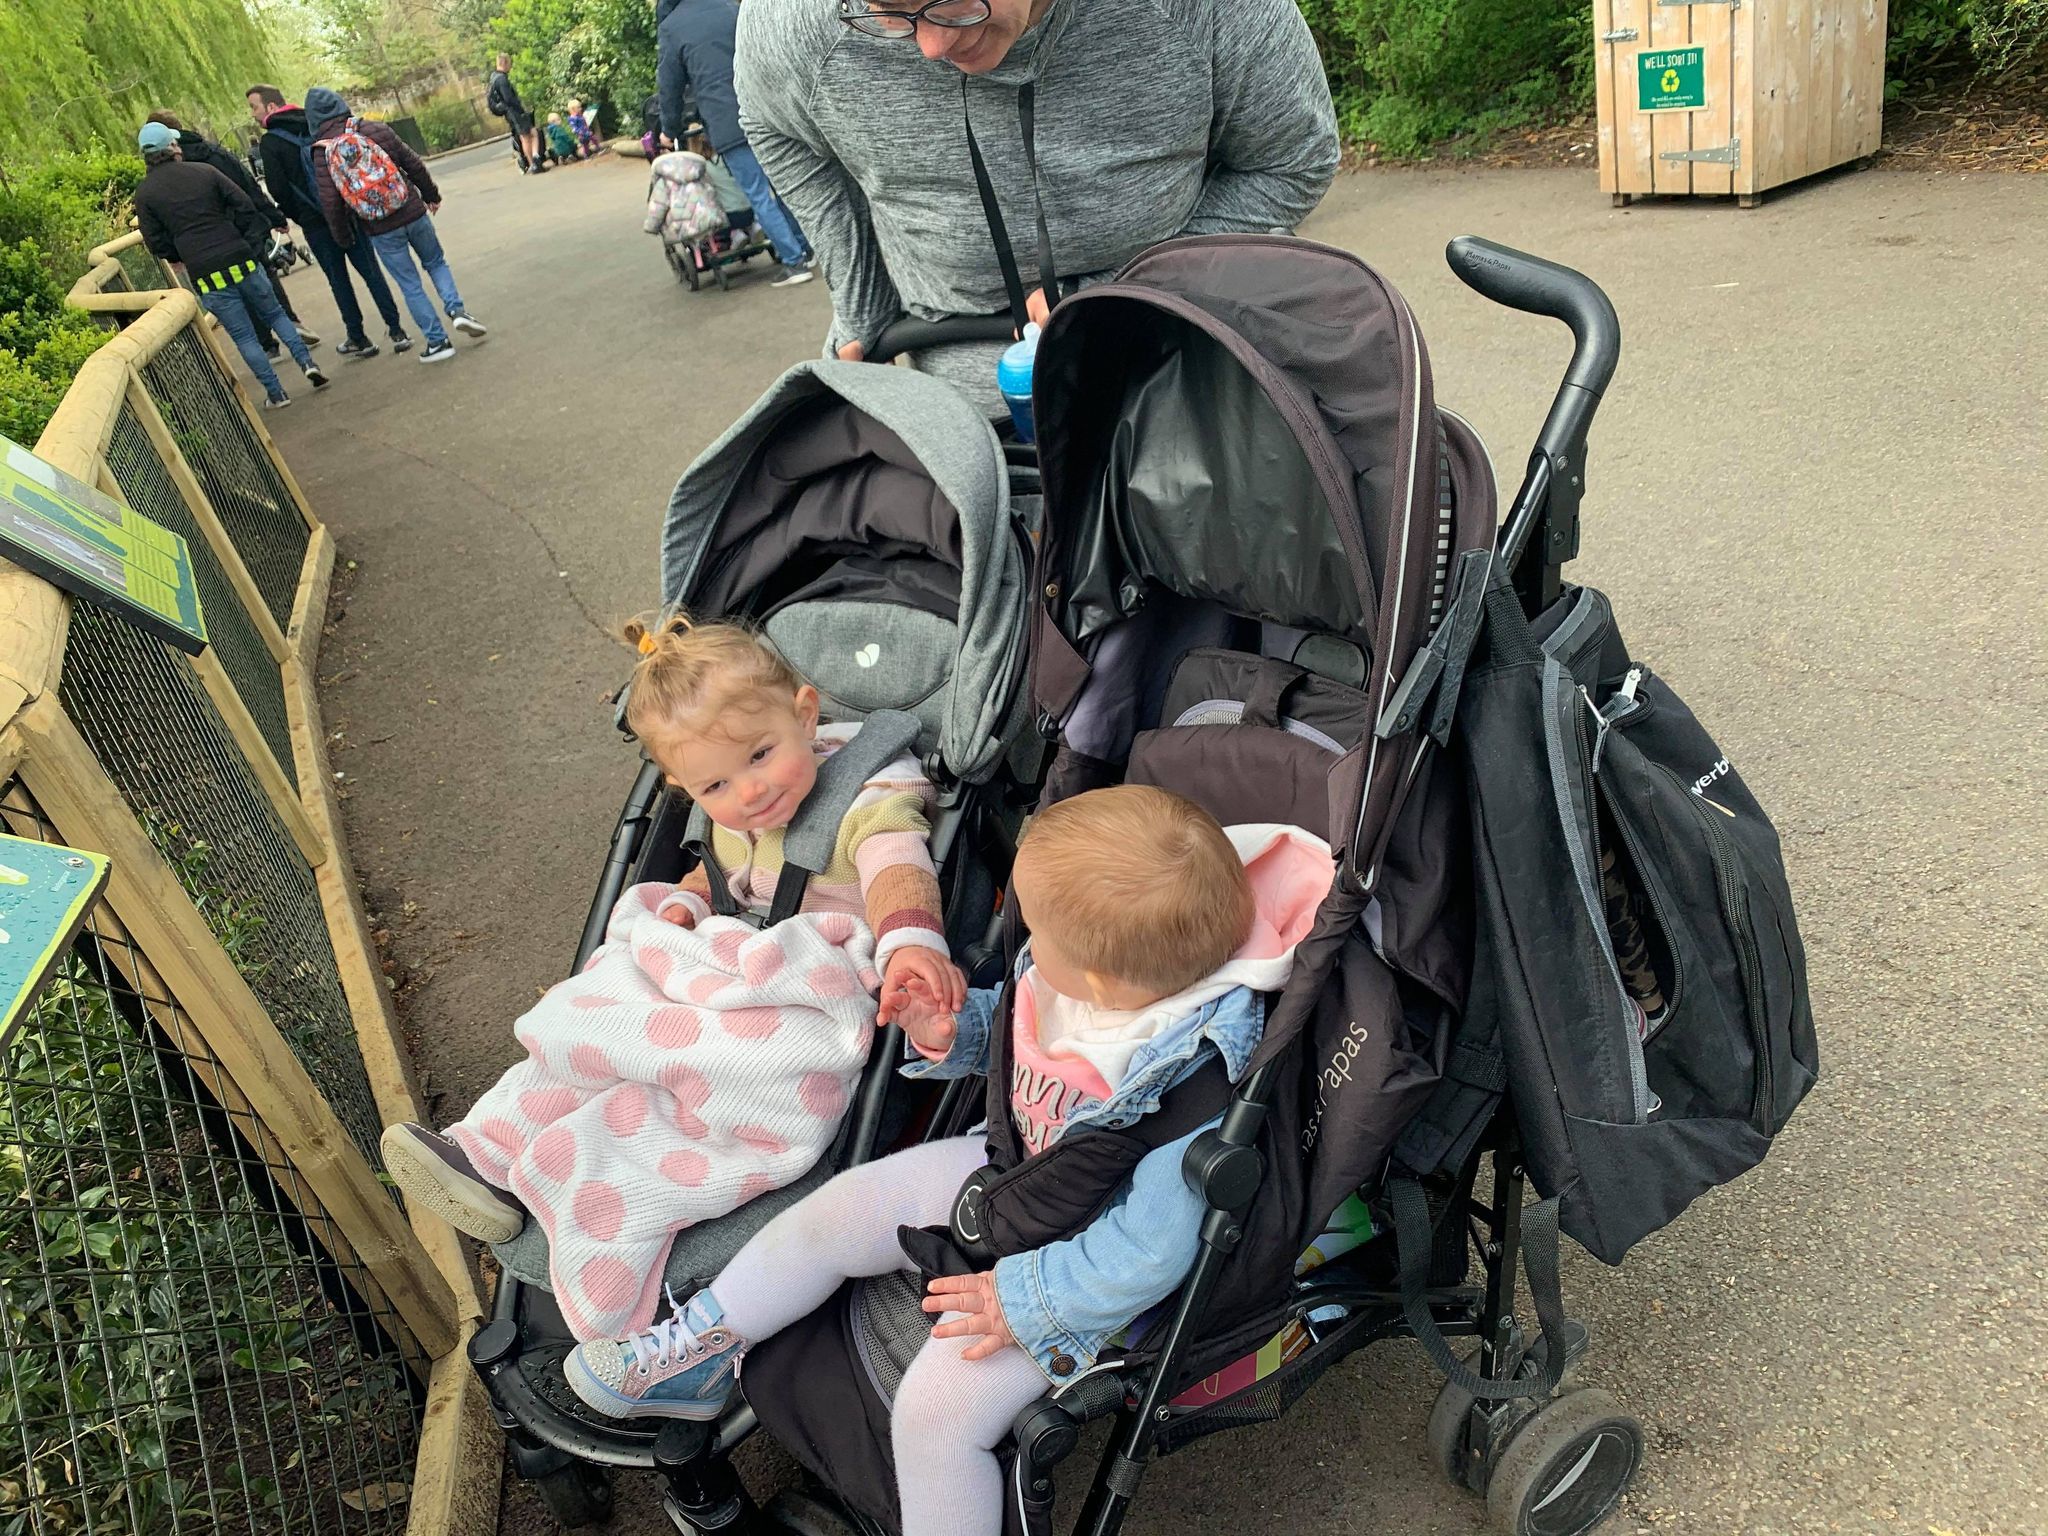 Ivy-Rose and Wynter, with mums Kerry and Elti, at Chester Zoo.